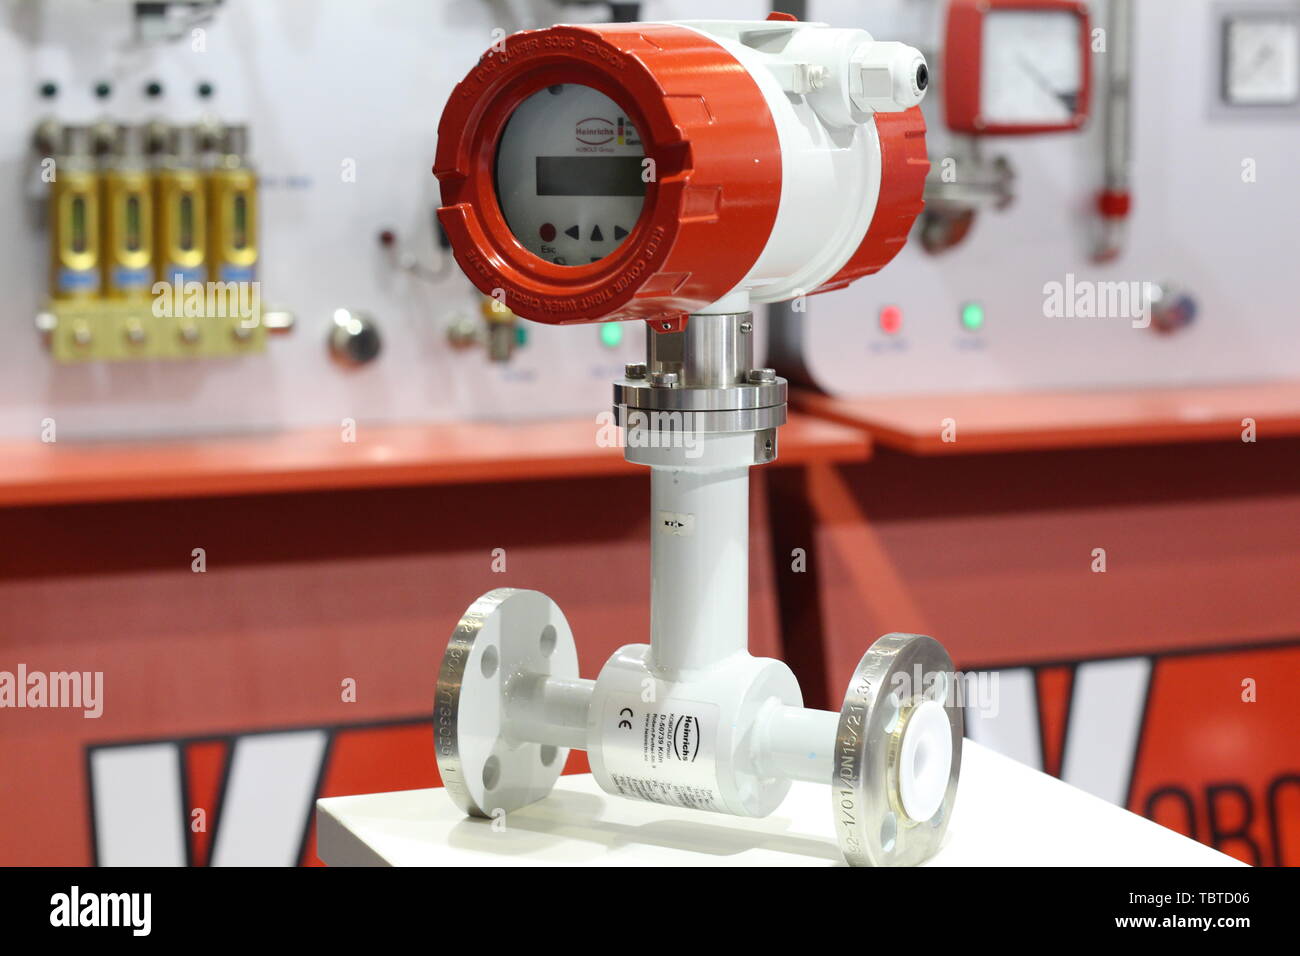 Moscow, RF. 17.04.2019: Magnetic inductive flow meter EPS For conductive liquids Oil and gas industry Stock Photo